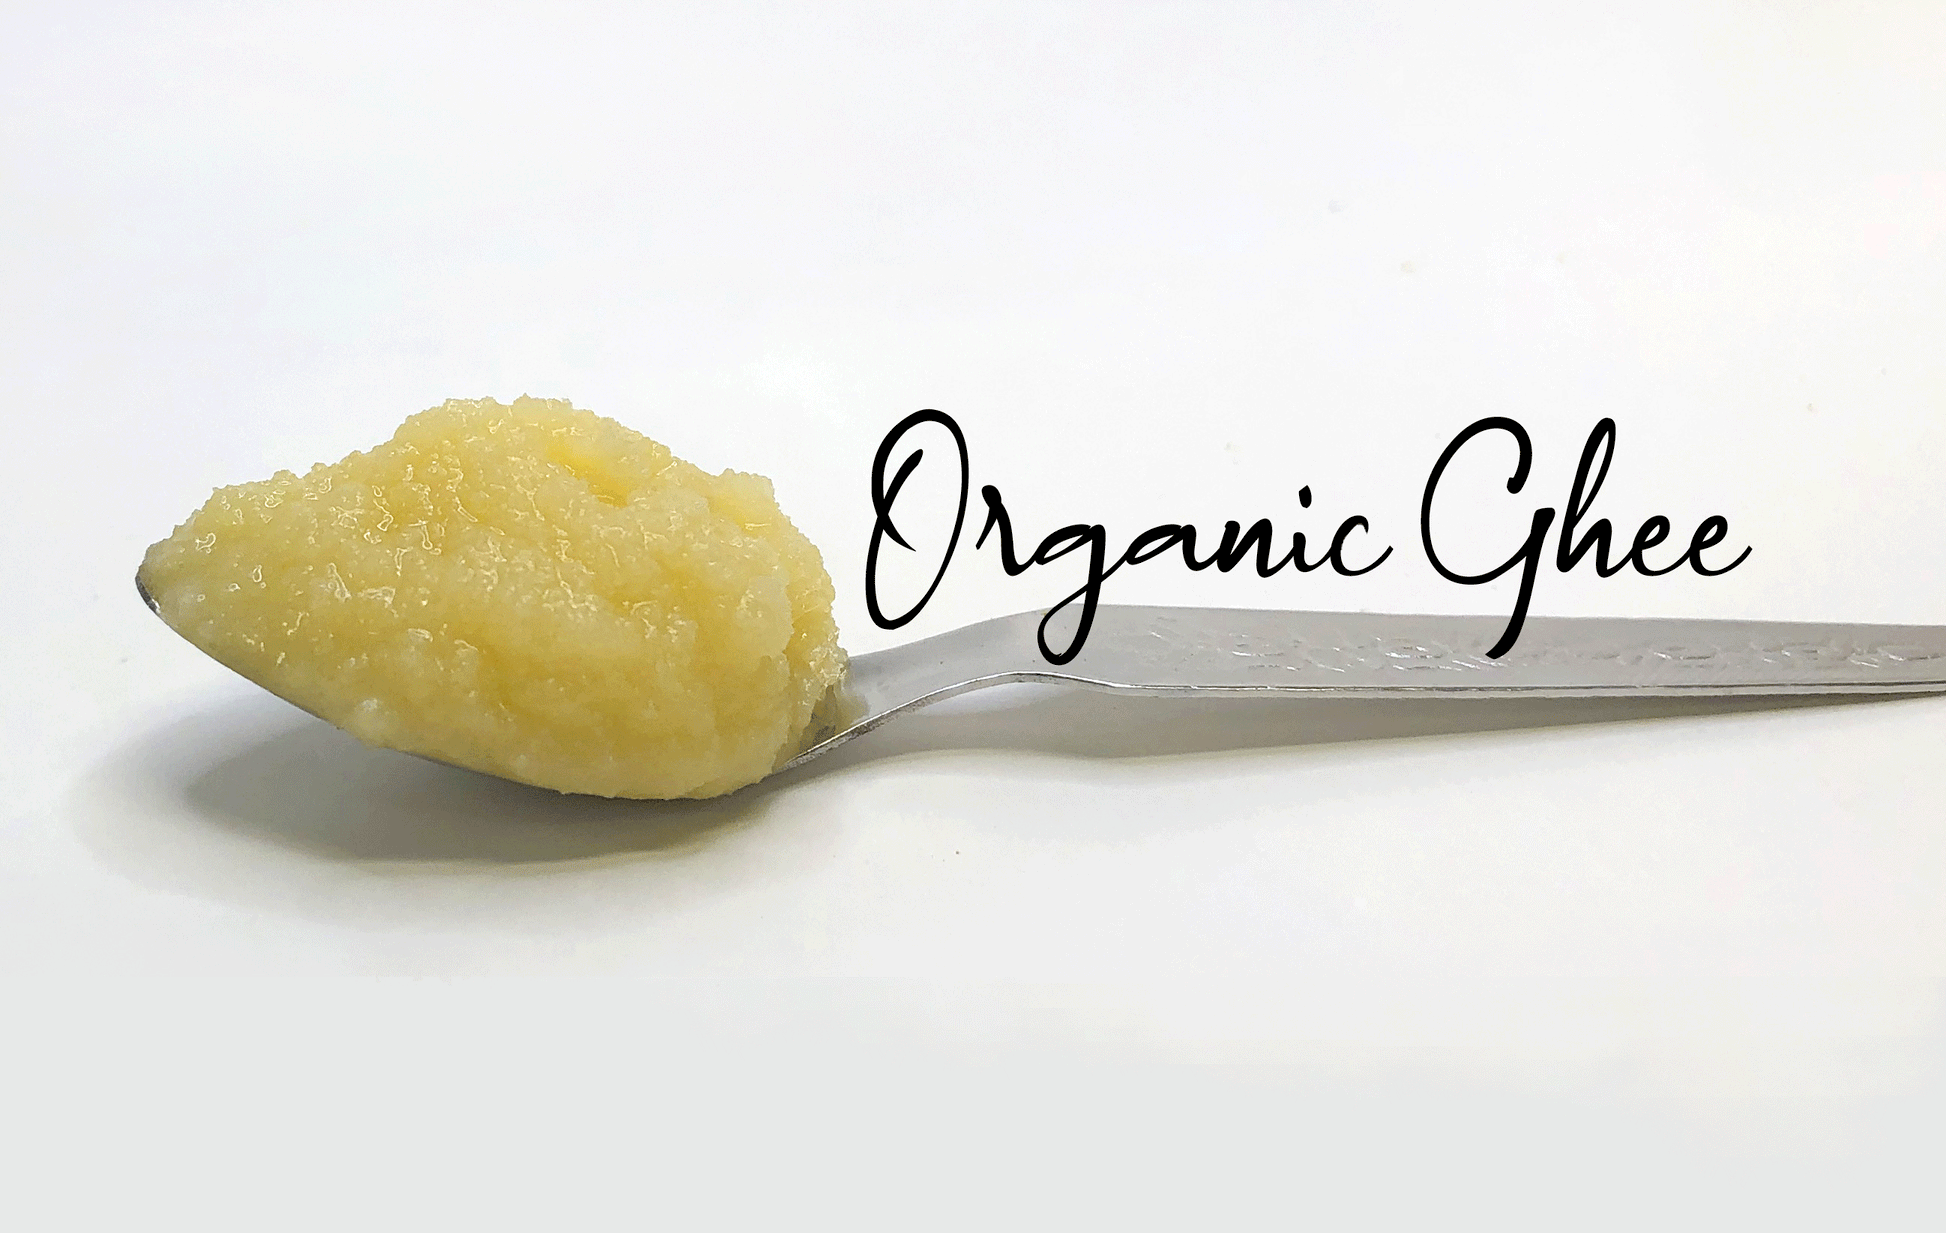 Spoonful Organic Ghee, Clarified Butter made in USA